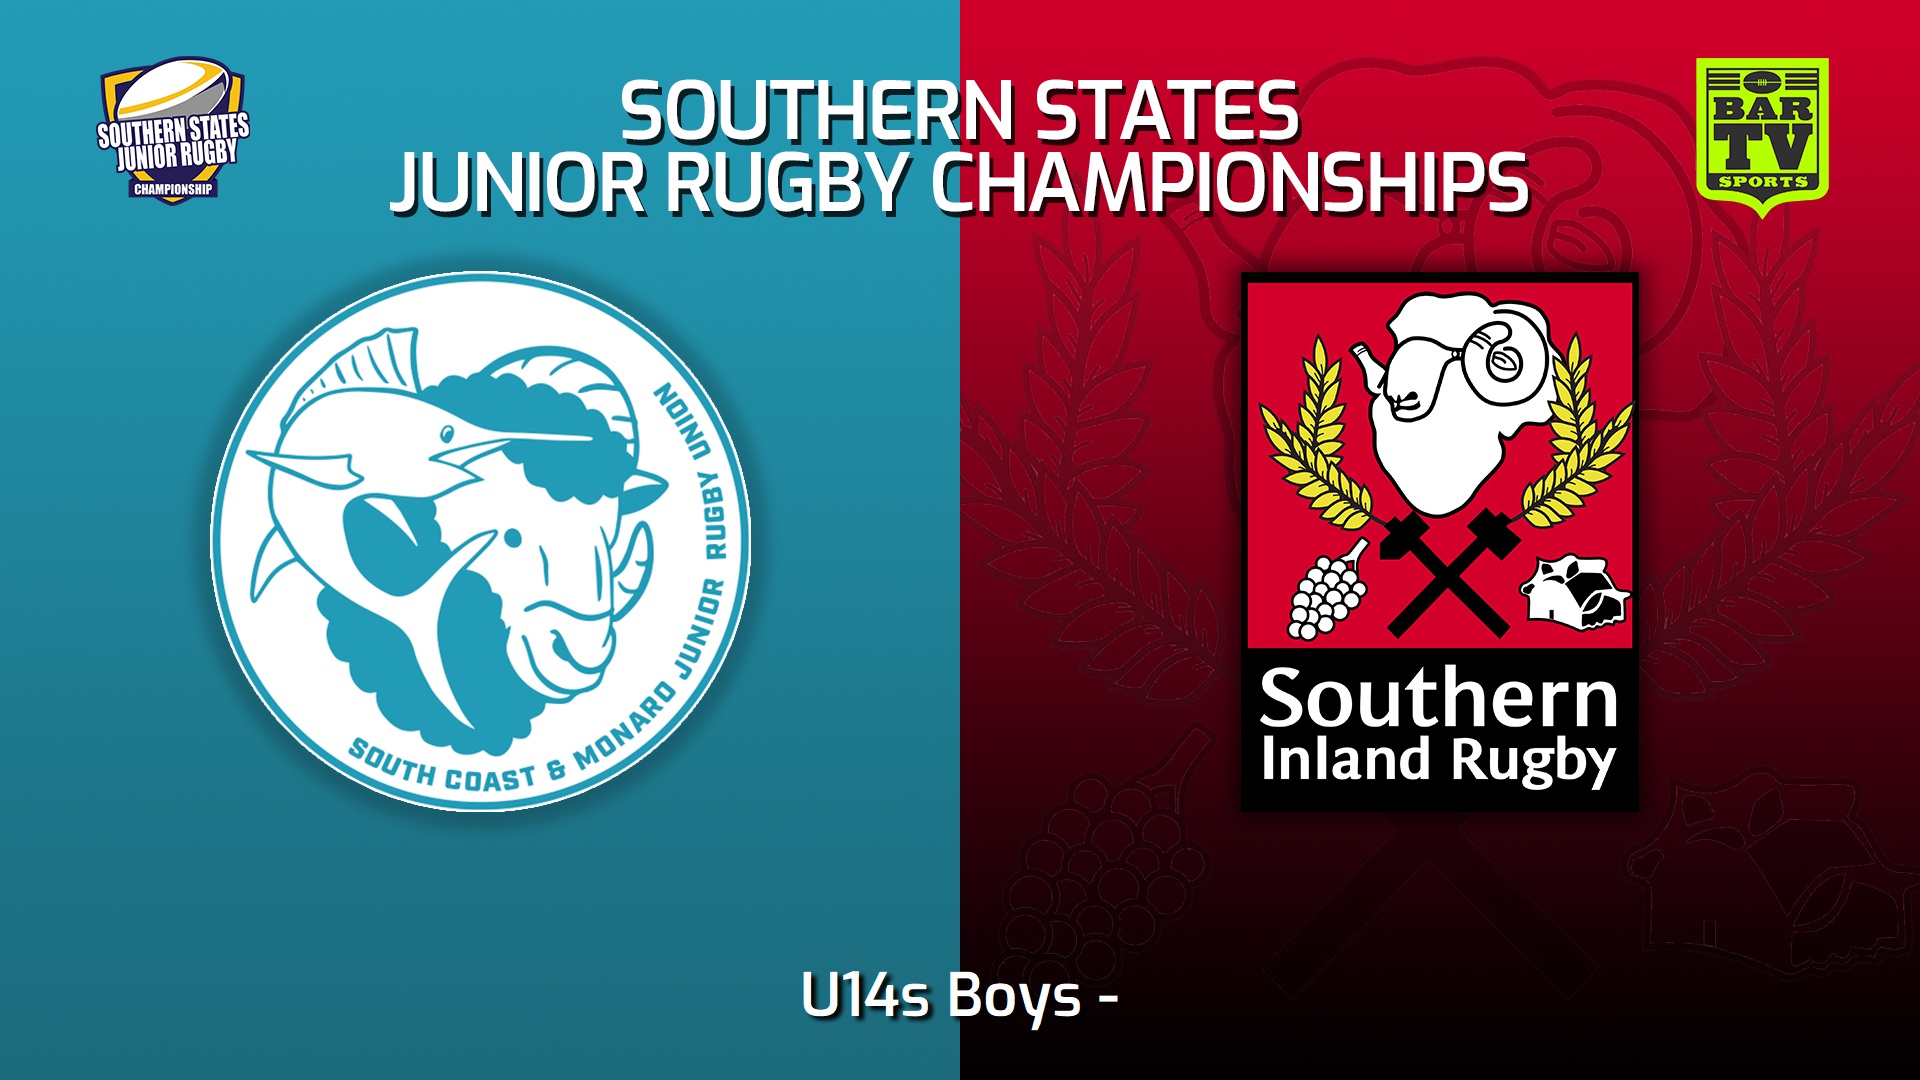 Southern States Junior Rugby Championships U14s Boys